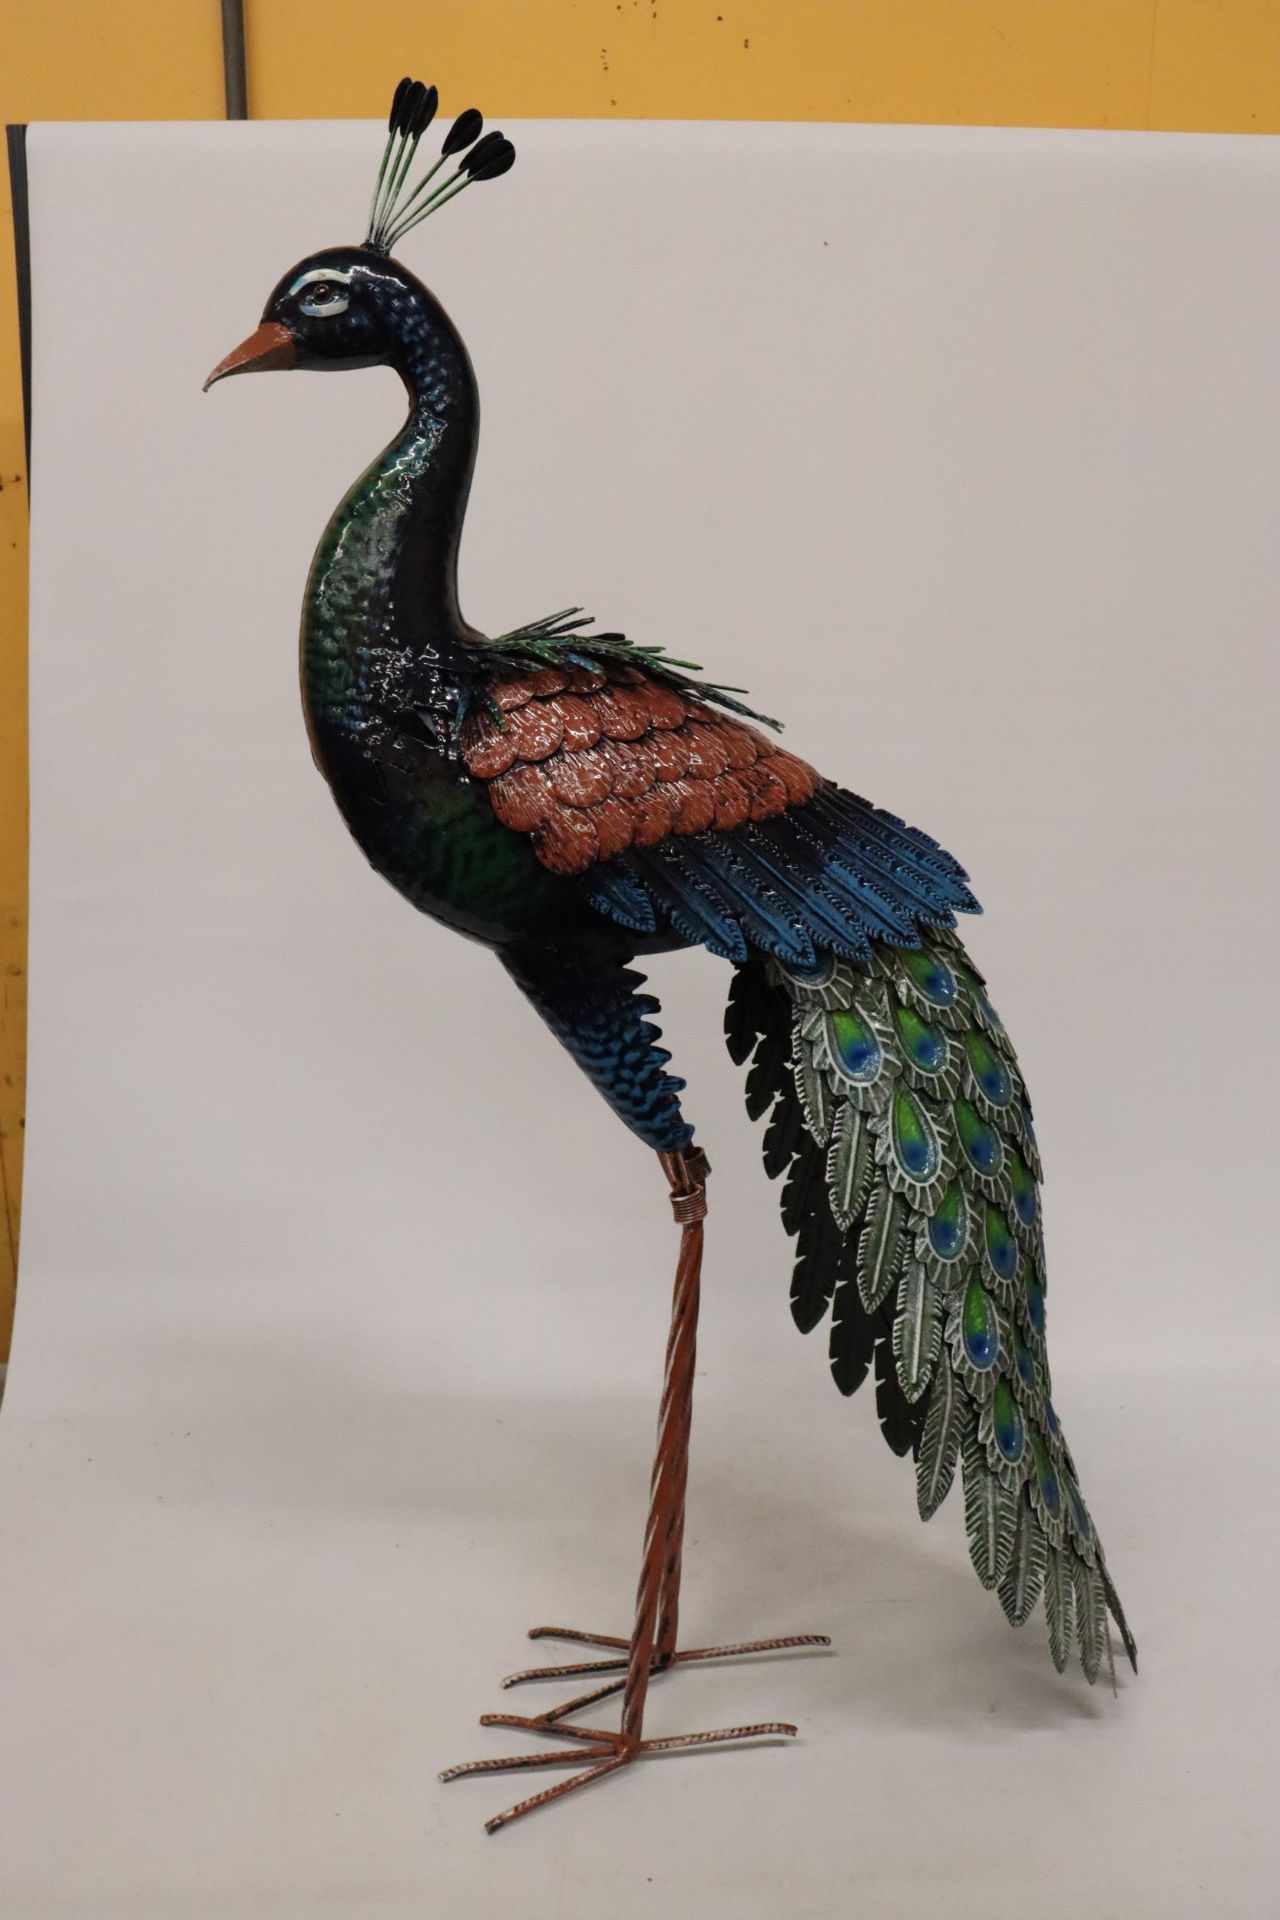 A HEAVY METAL PAINTED PEACOCK GARDEN ORNAMENT, 1 METRE HIGH - Image 4 of 8